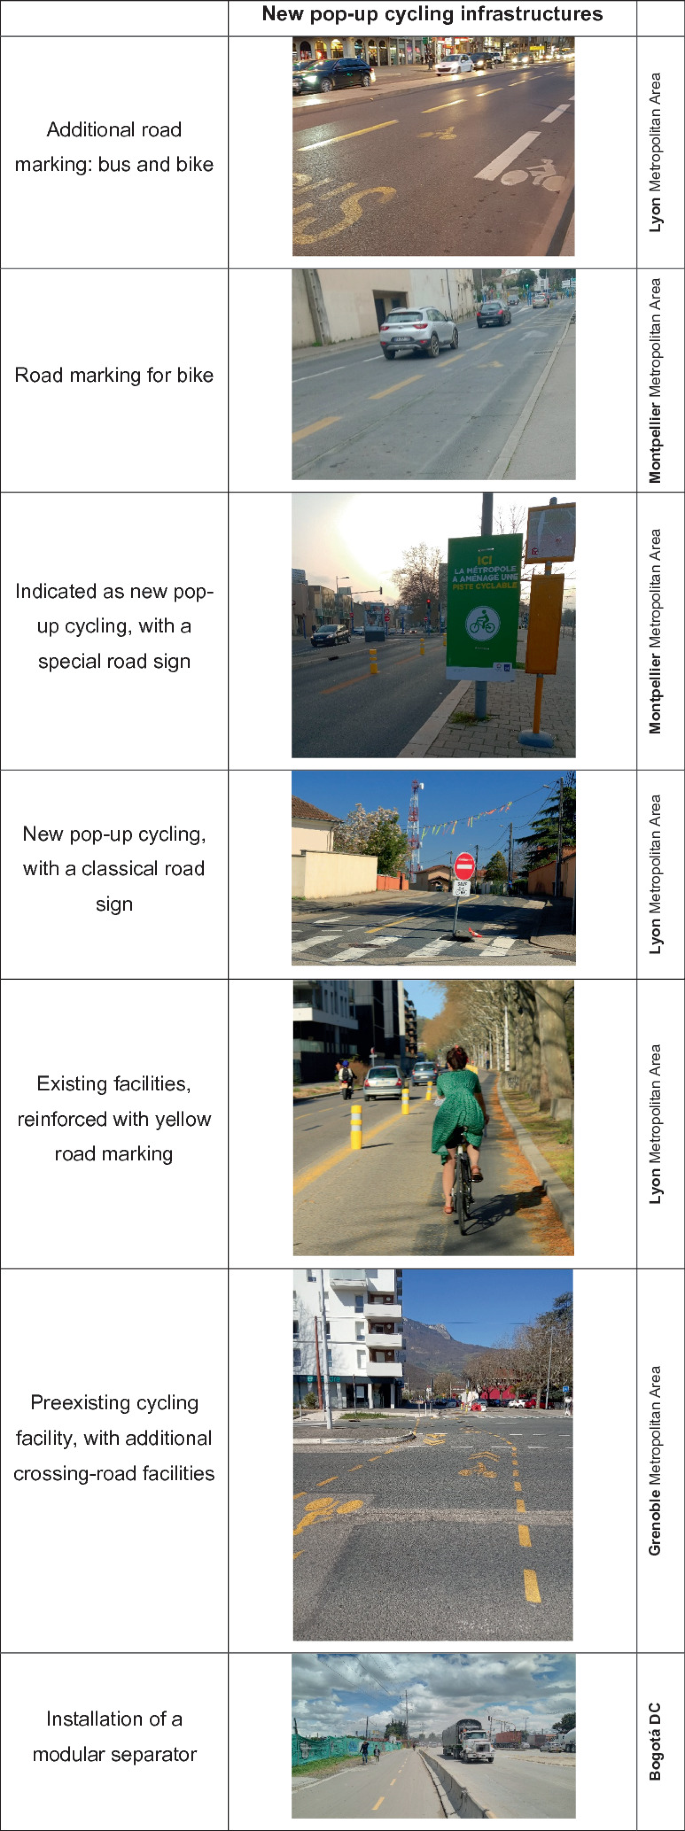 A table titled new pop-up cycling infrastructures. It has photos for additional road marking of bus and bike, road marking for bike, road sign for pop-up cycling, pop-up cycling with classical road sign, a road marked with yellow road marking, crossing road facility, and installation of a module separator.